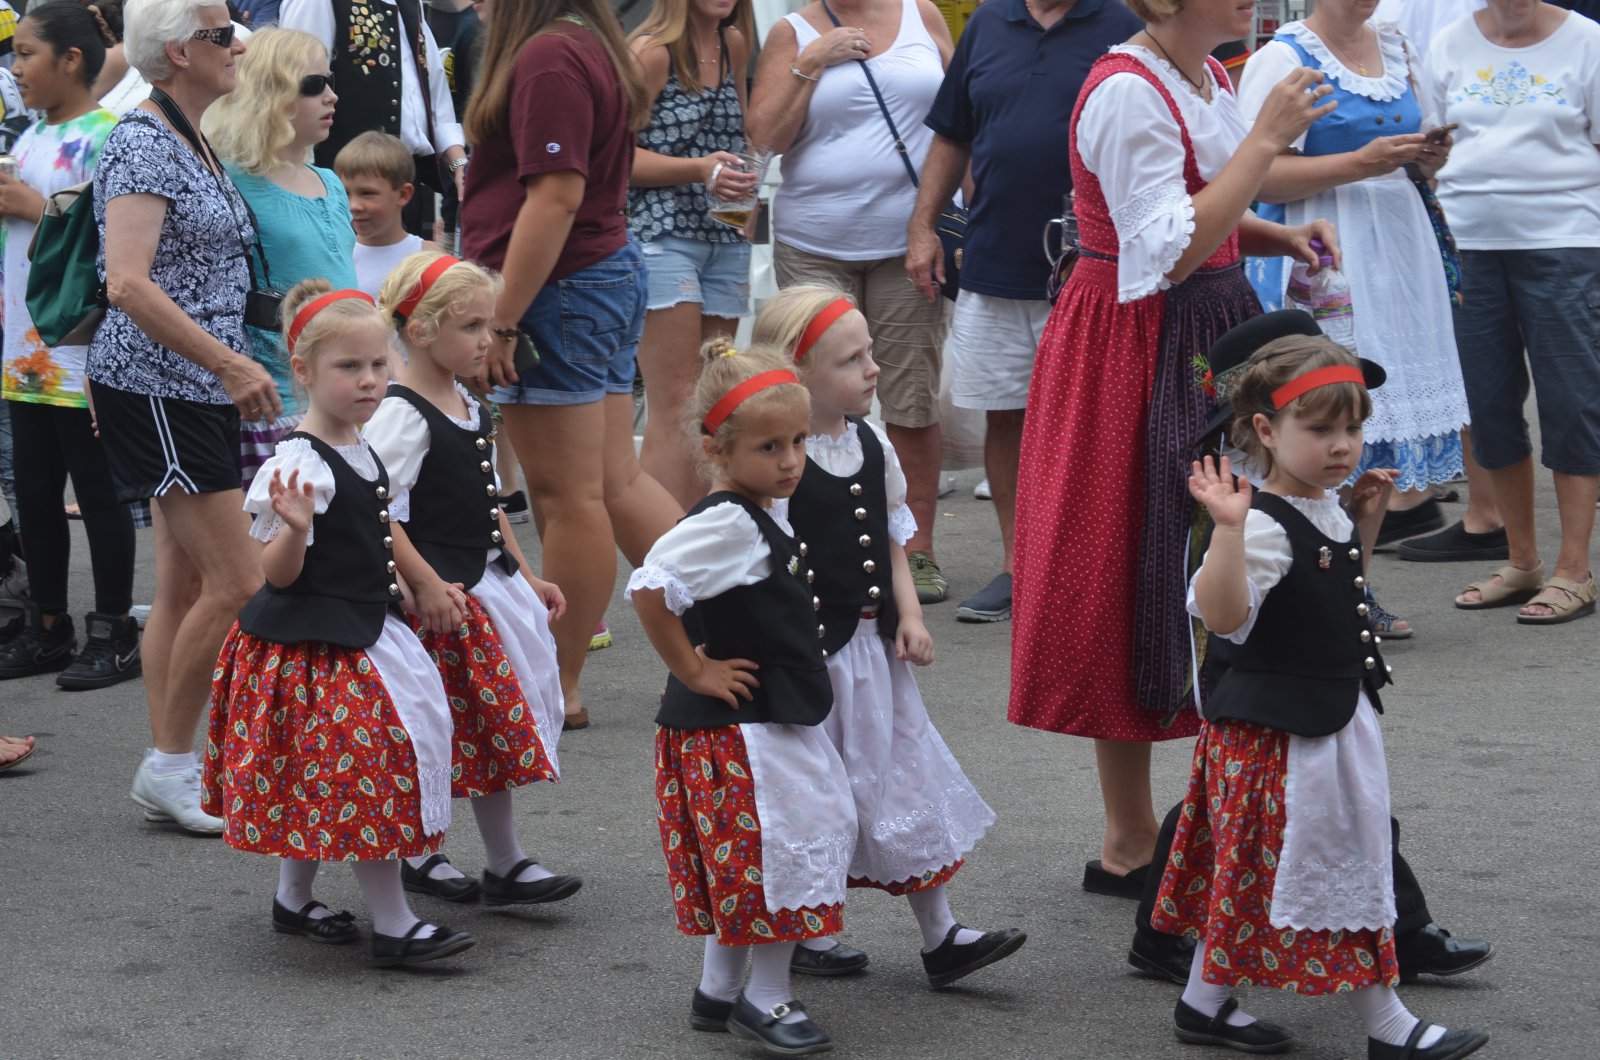 Photo Gallery GermanFest, the Most Authentic Ethnic Fest? » Urban